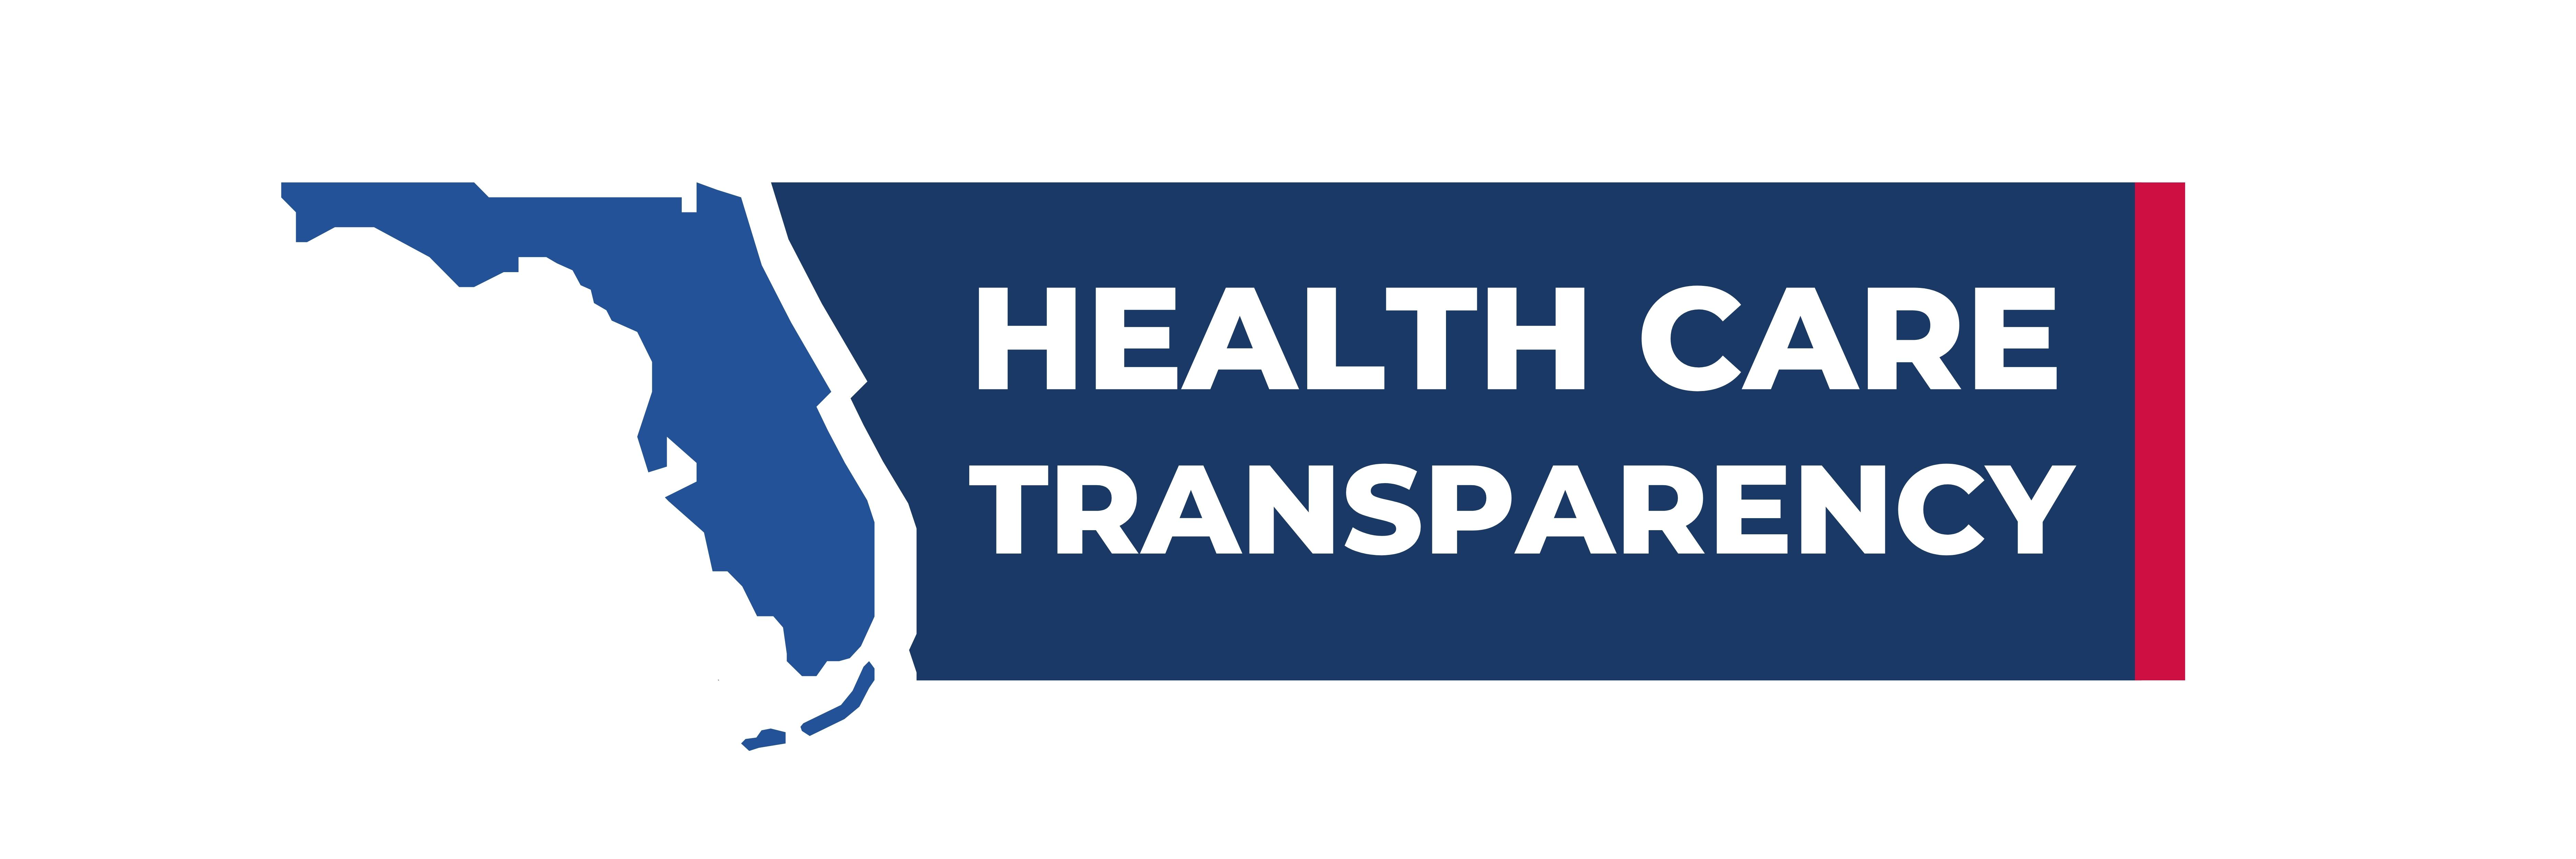 Florida Agency for Health Care Administration - Health Care Transparency Logo